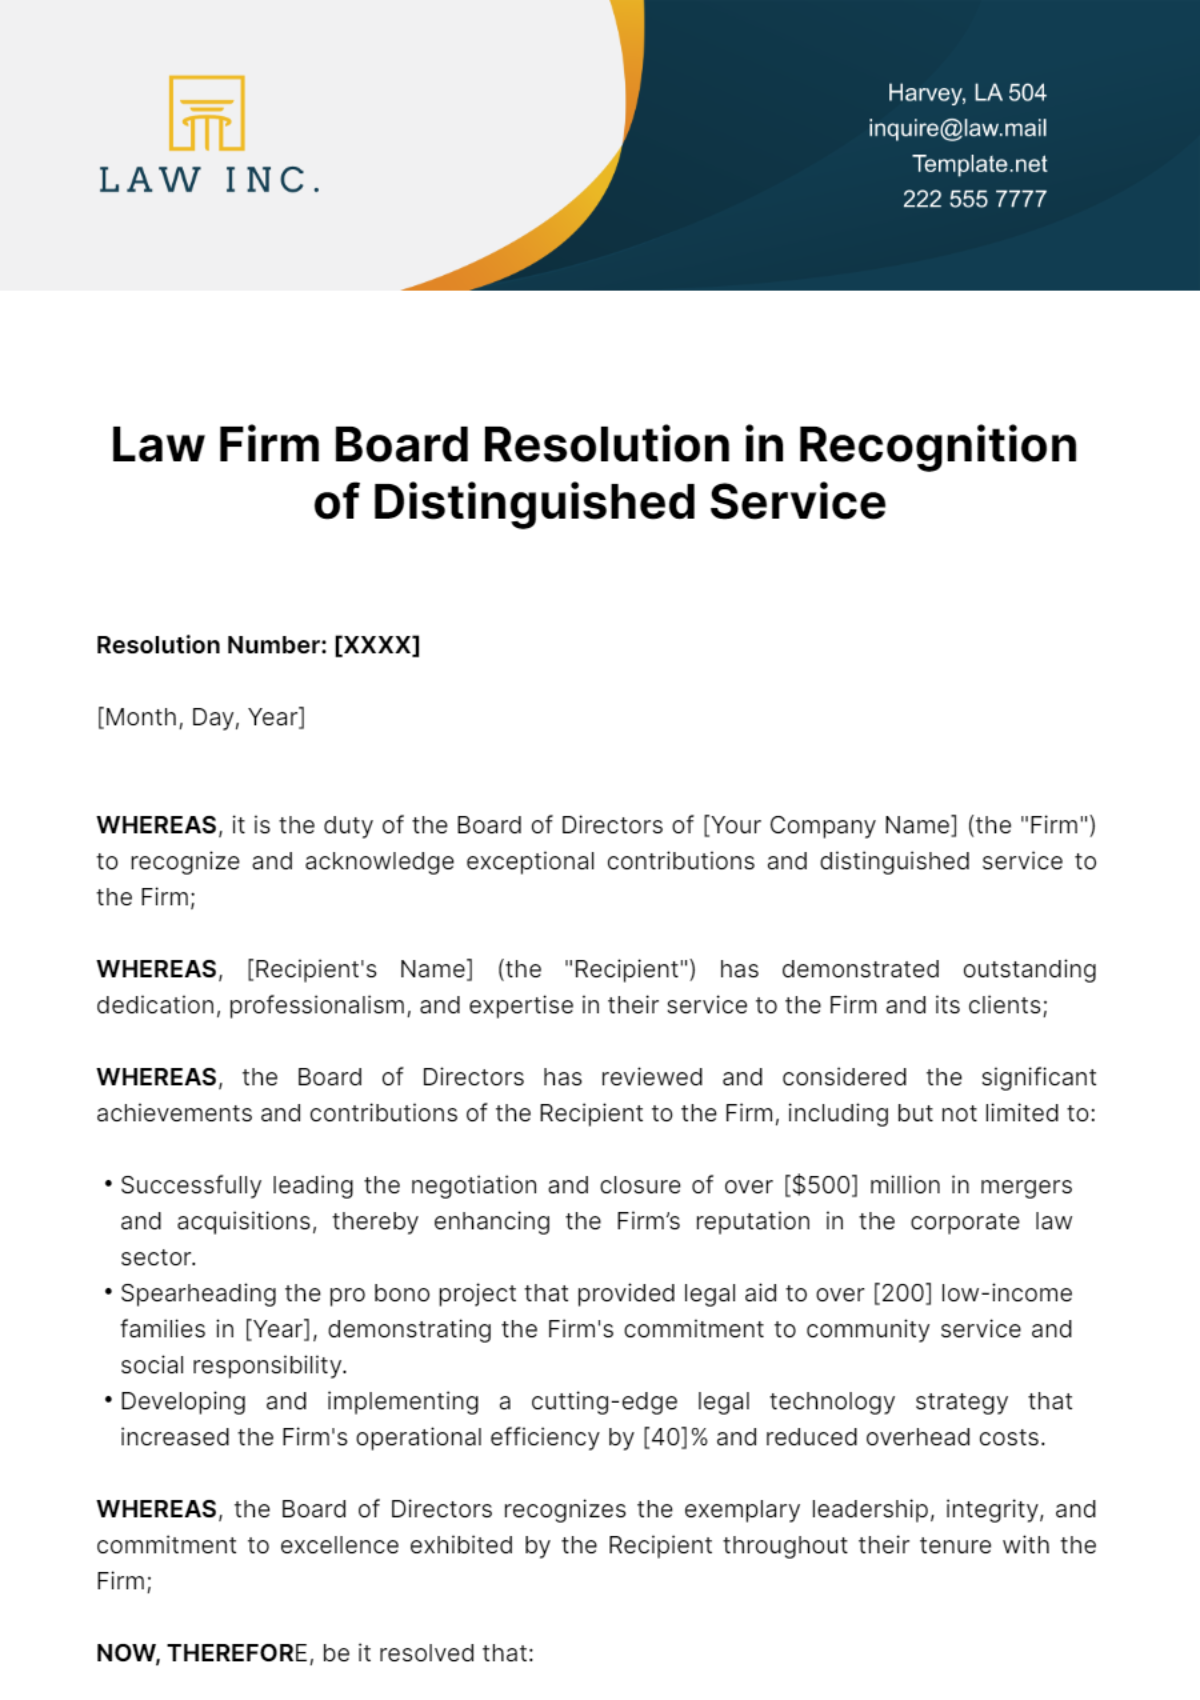 Law Firm Board Resolution in Recognition of Distinguished Service Template